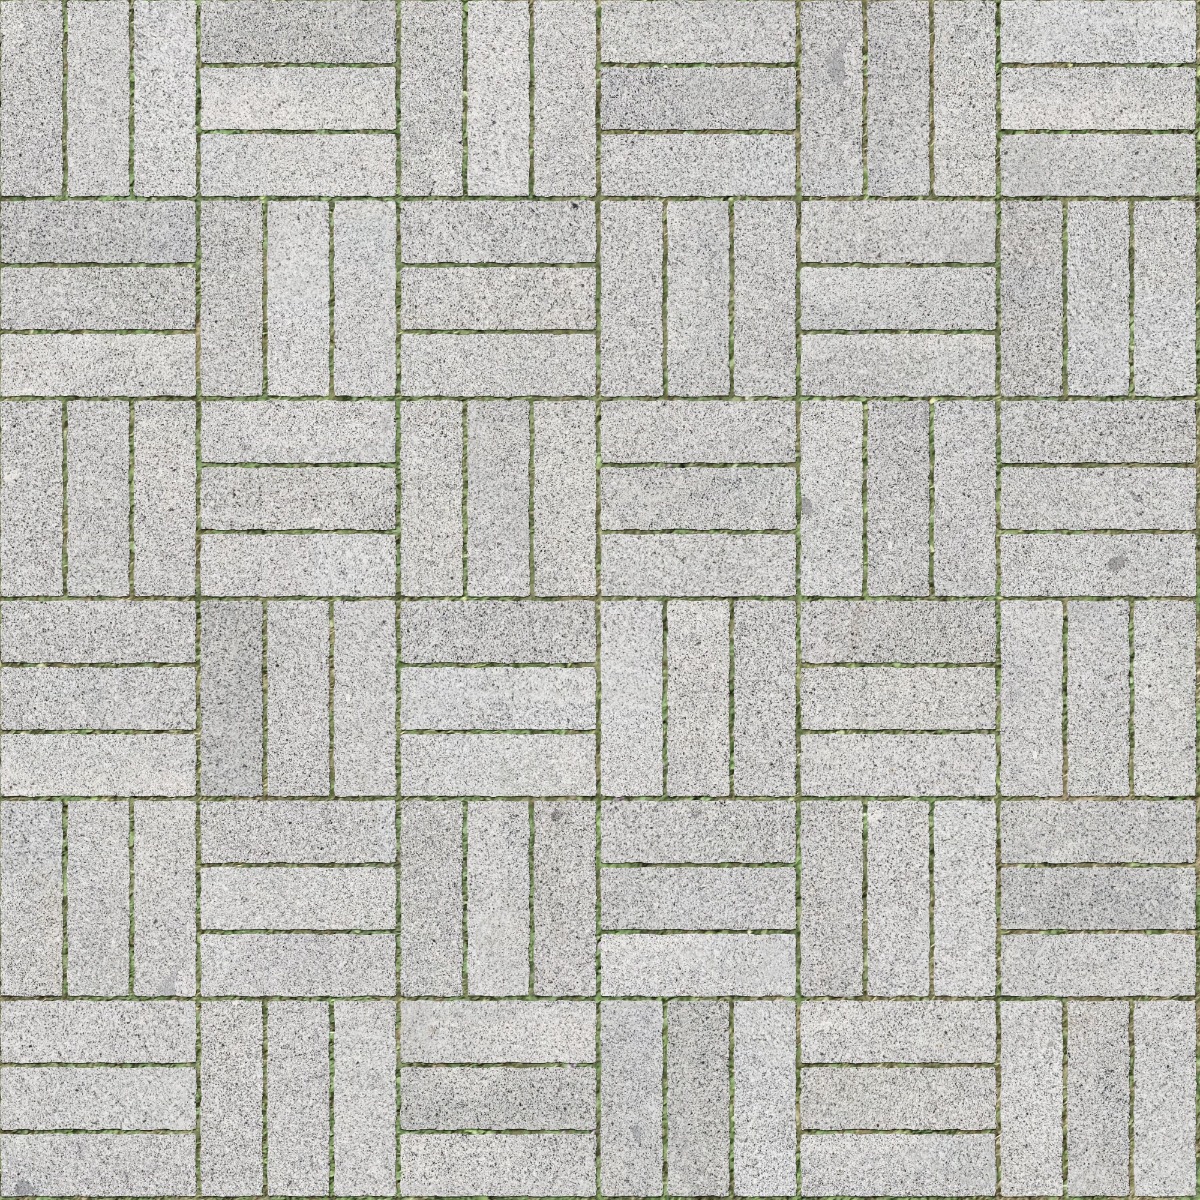 A seamless stone texture with granite blocks arranged in a Basketweave pattern